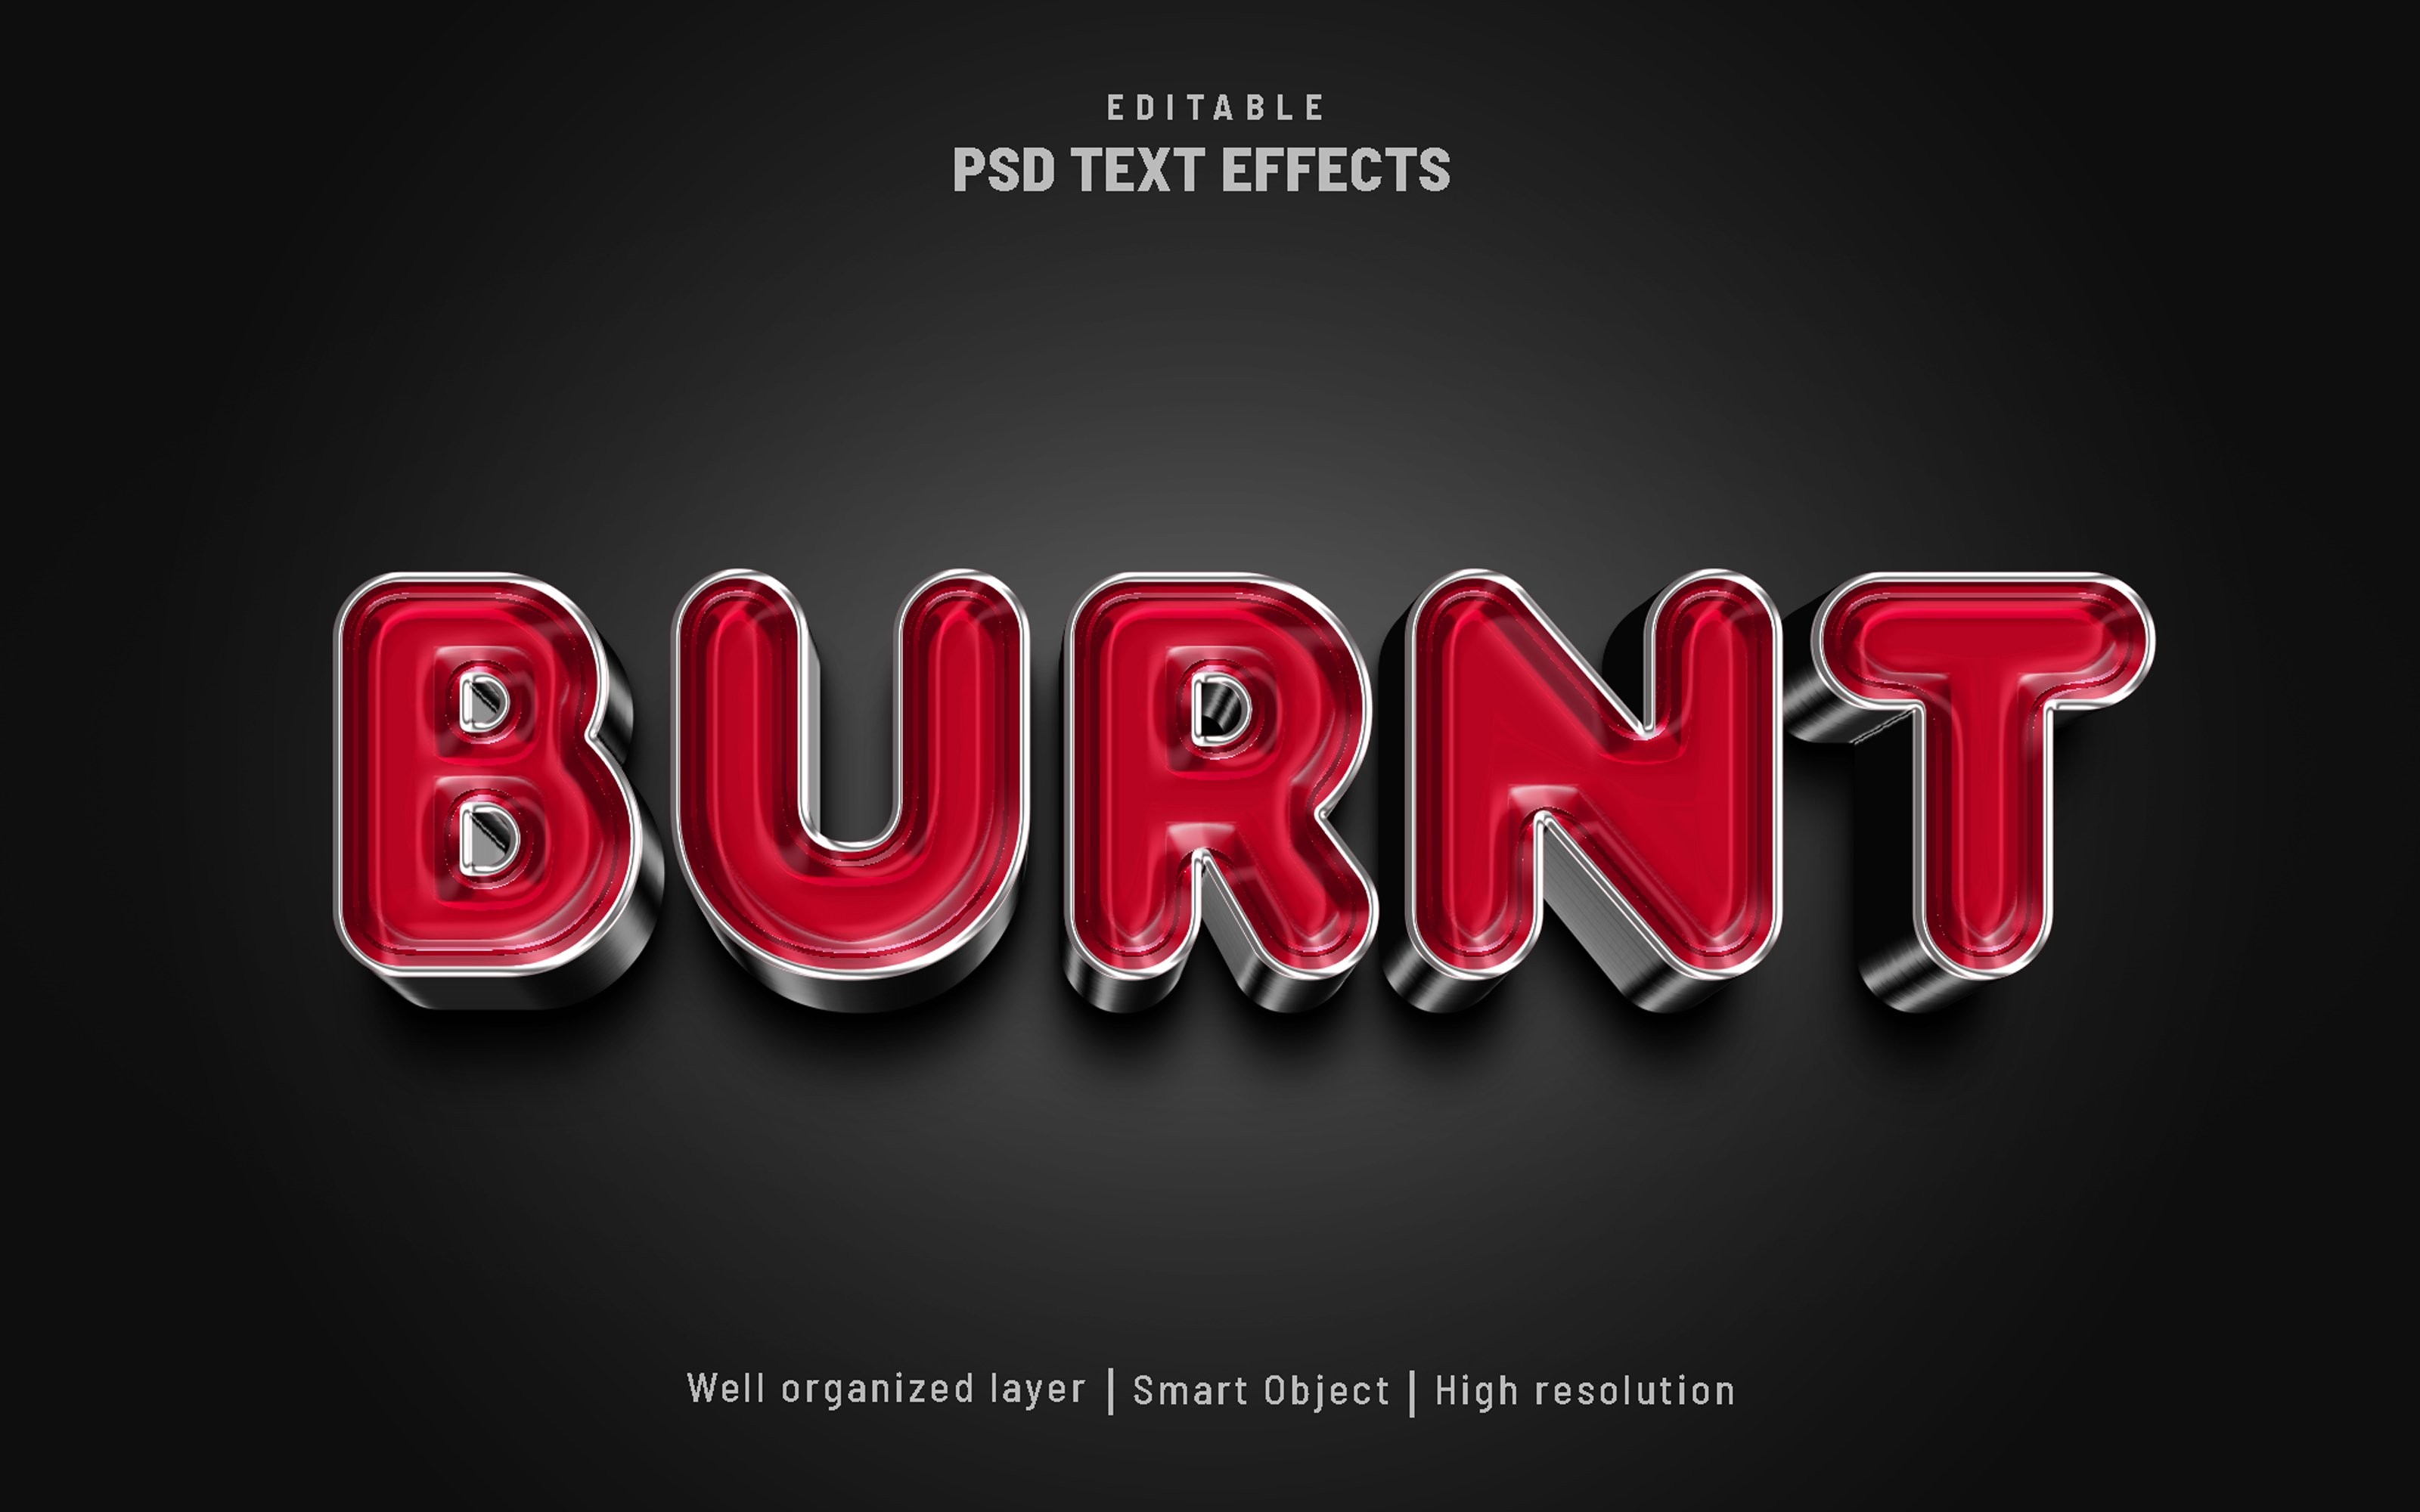 Burnt editable text effect PSDcover image.